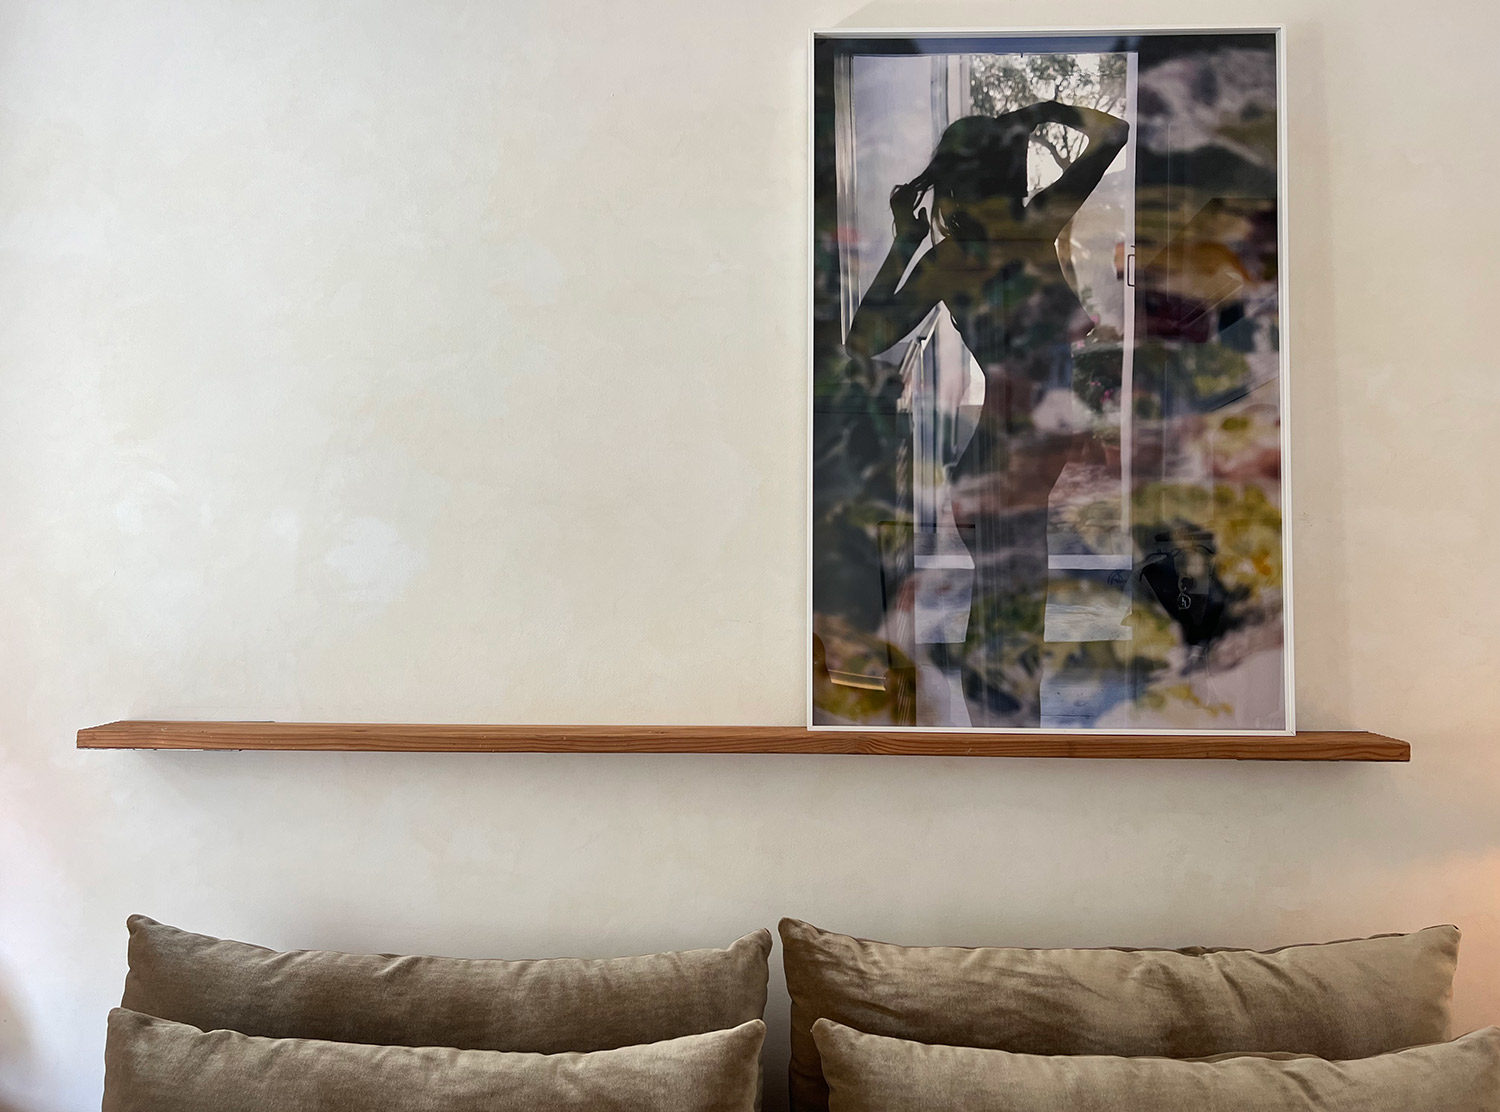 Shila The Shila team has strong ties with local and international artists, and designers, select works are showcased throughout the hotel. This is a piece by Eftihia Stefanidi. Every piece of art you see at Shila can be yours